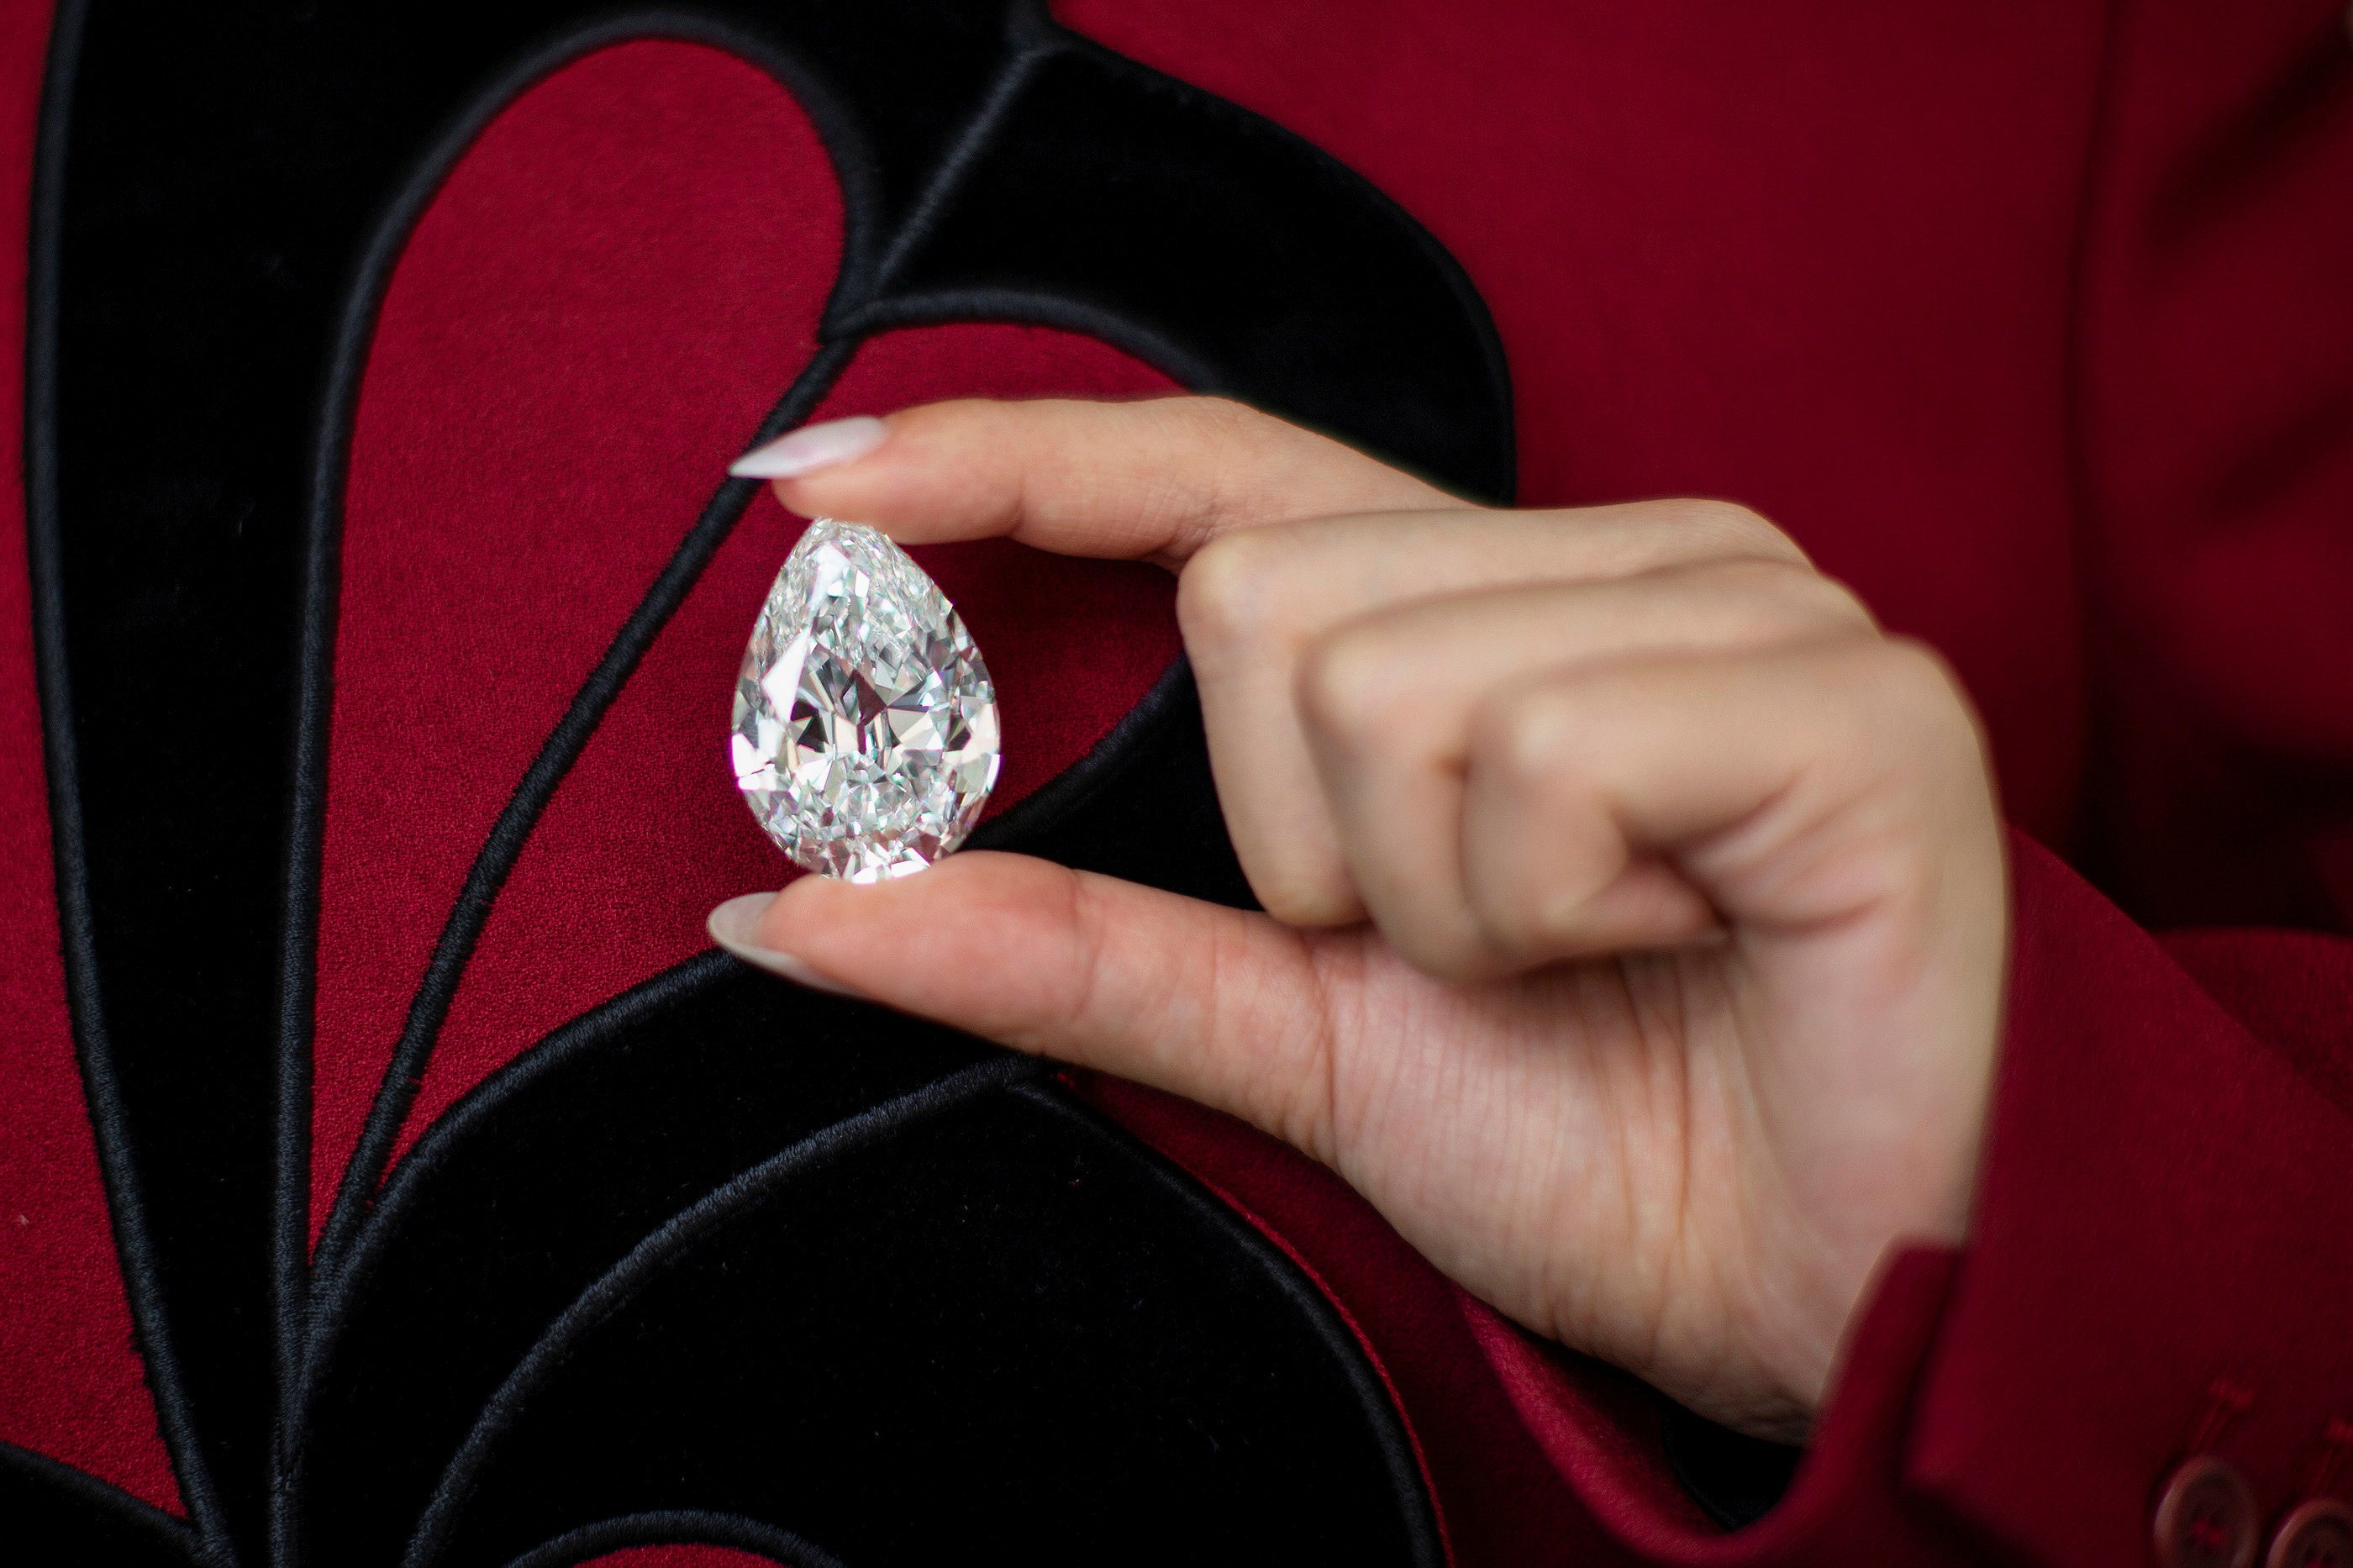 An employee of Sotheby's poses with a rare pear-Shaped D Colour Flawless 100+ carat diamond at Sotheby's in New York City, New York, US, 21 June, 2021